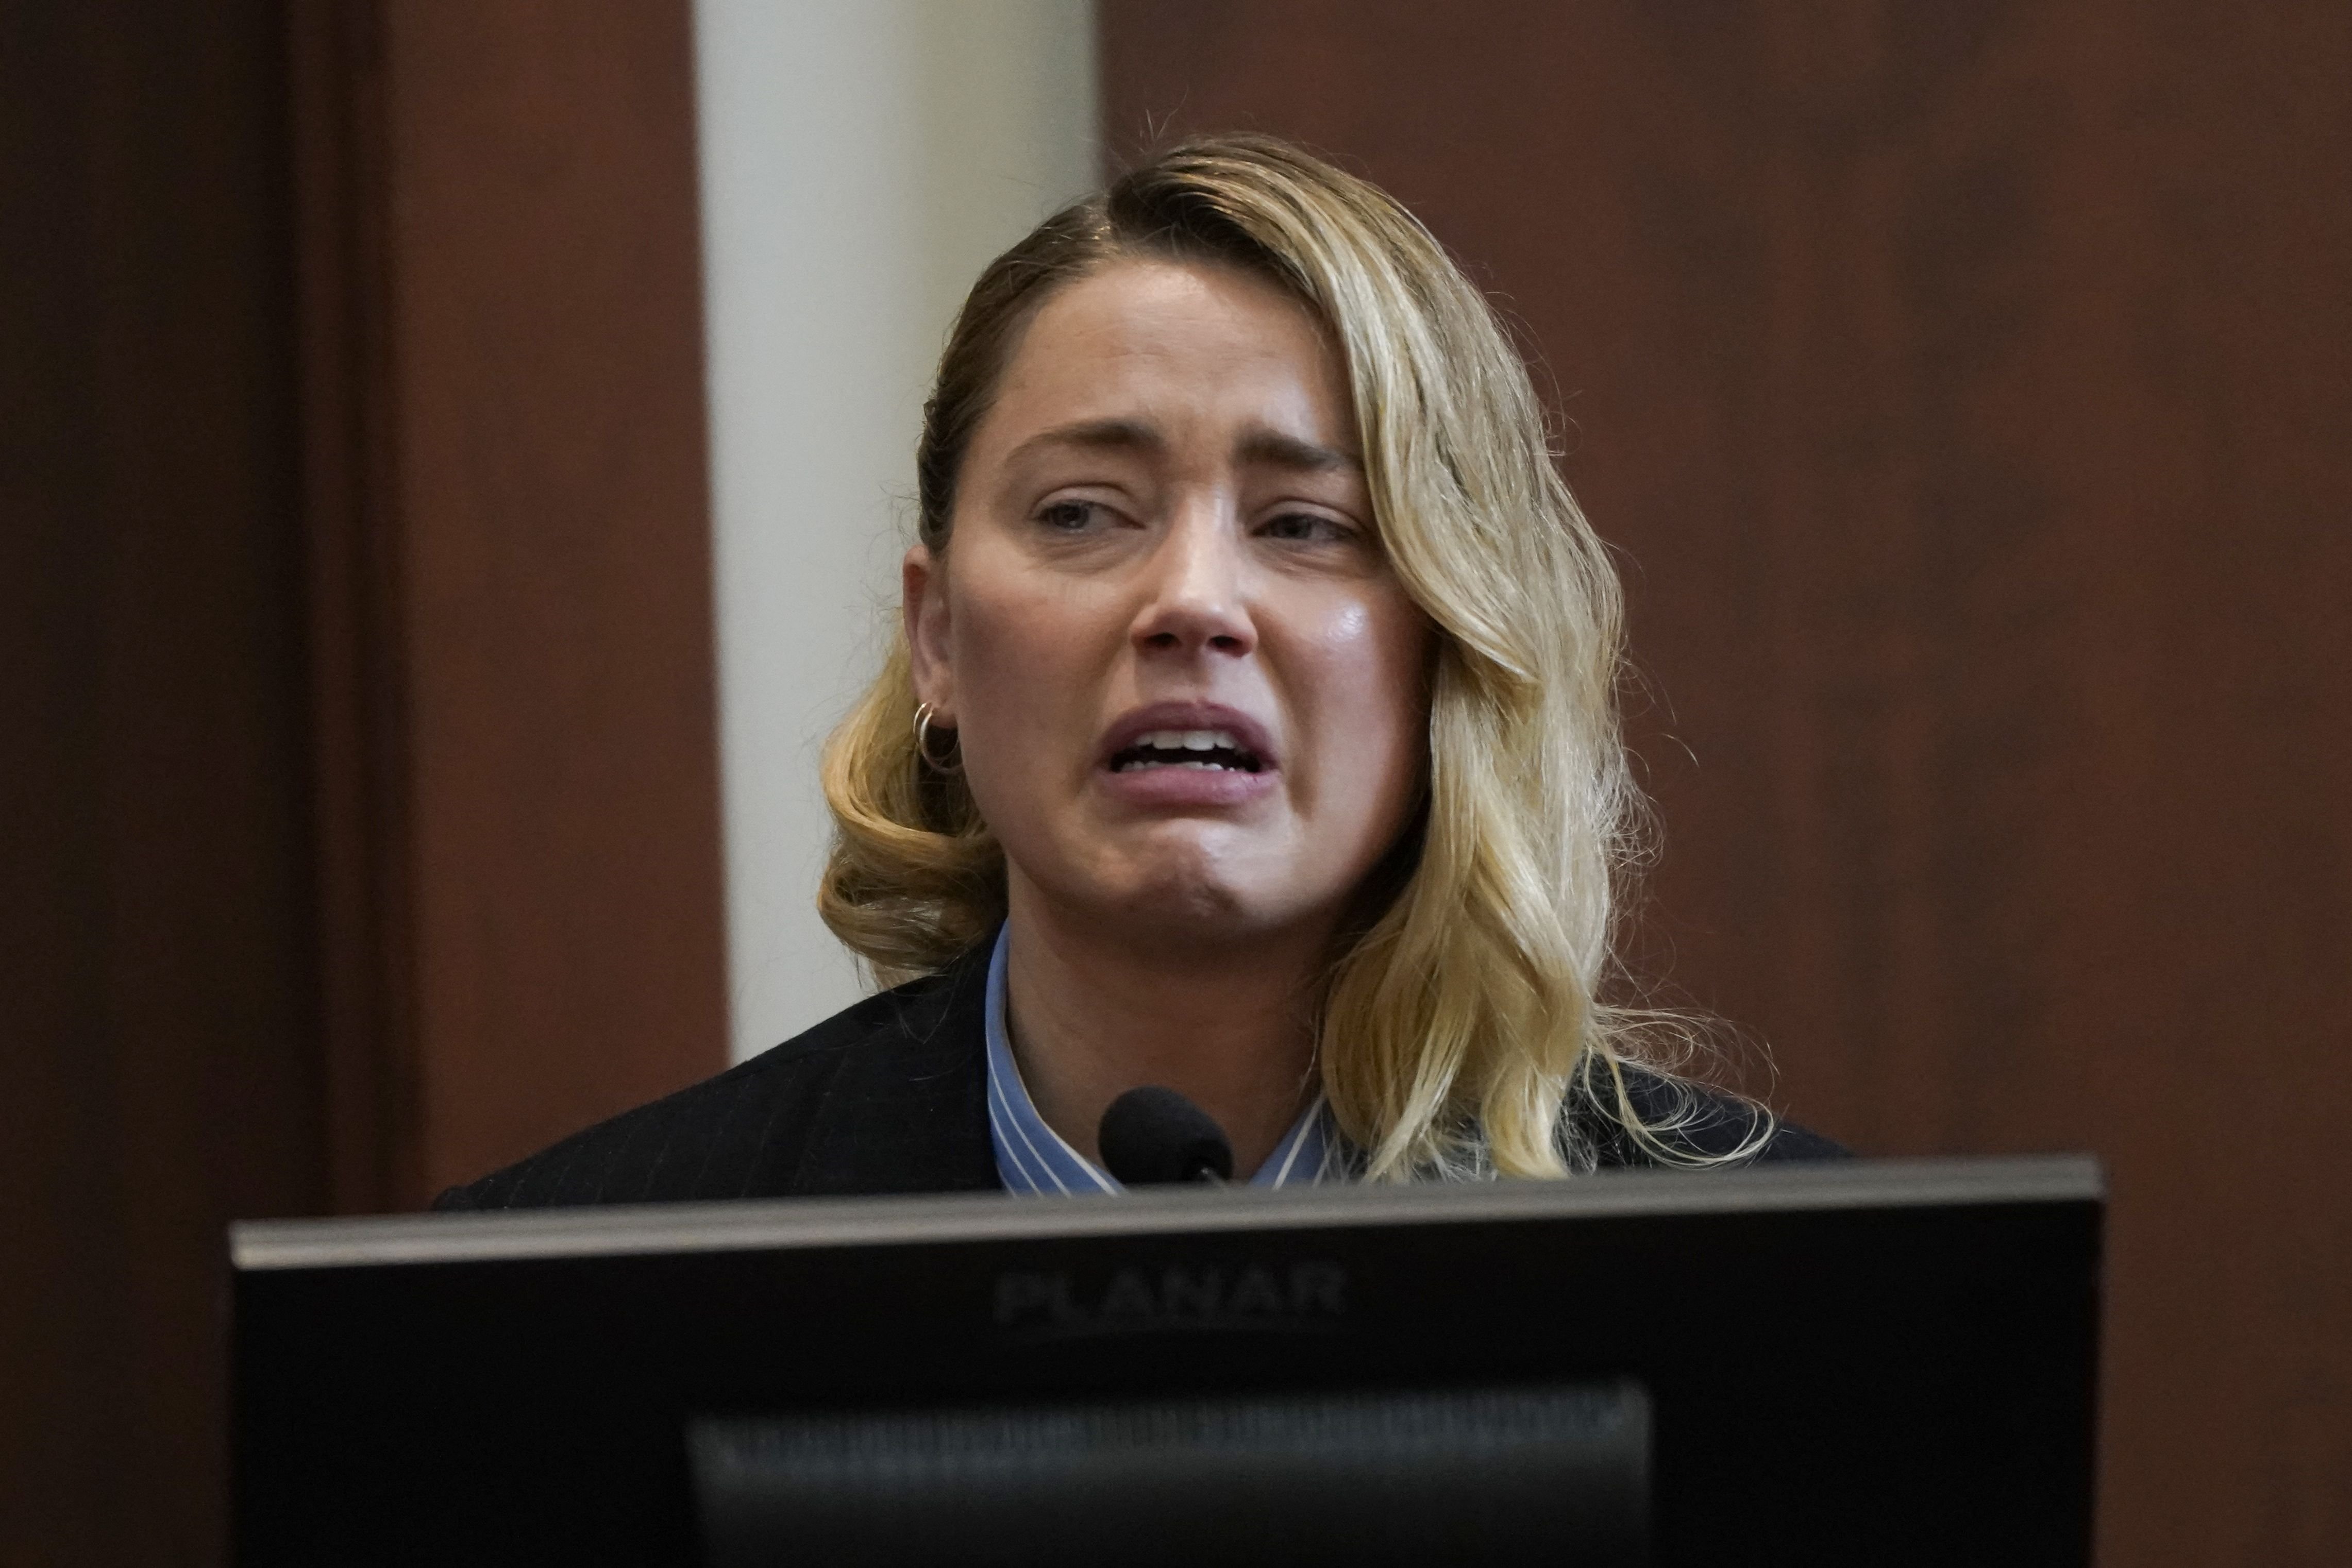 Amber Heard testifies against Johnny Depp at Fairfax County Circuit Court during a defamation case against her in Fairfax, Virginia, on May 4, 2022. | Source: Elizabeth Frantz/POOL/AFP/Getty Images